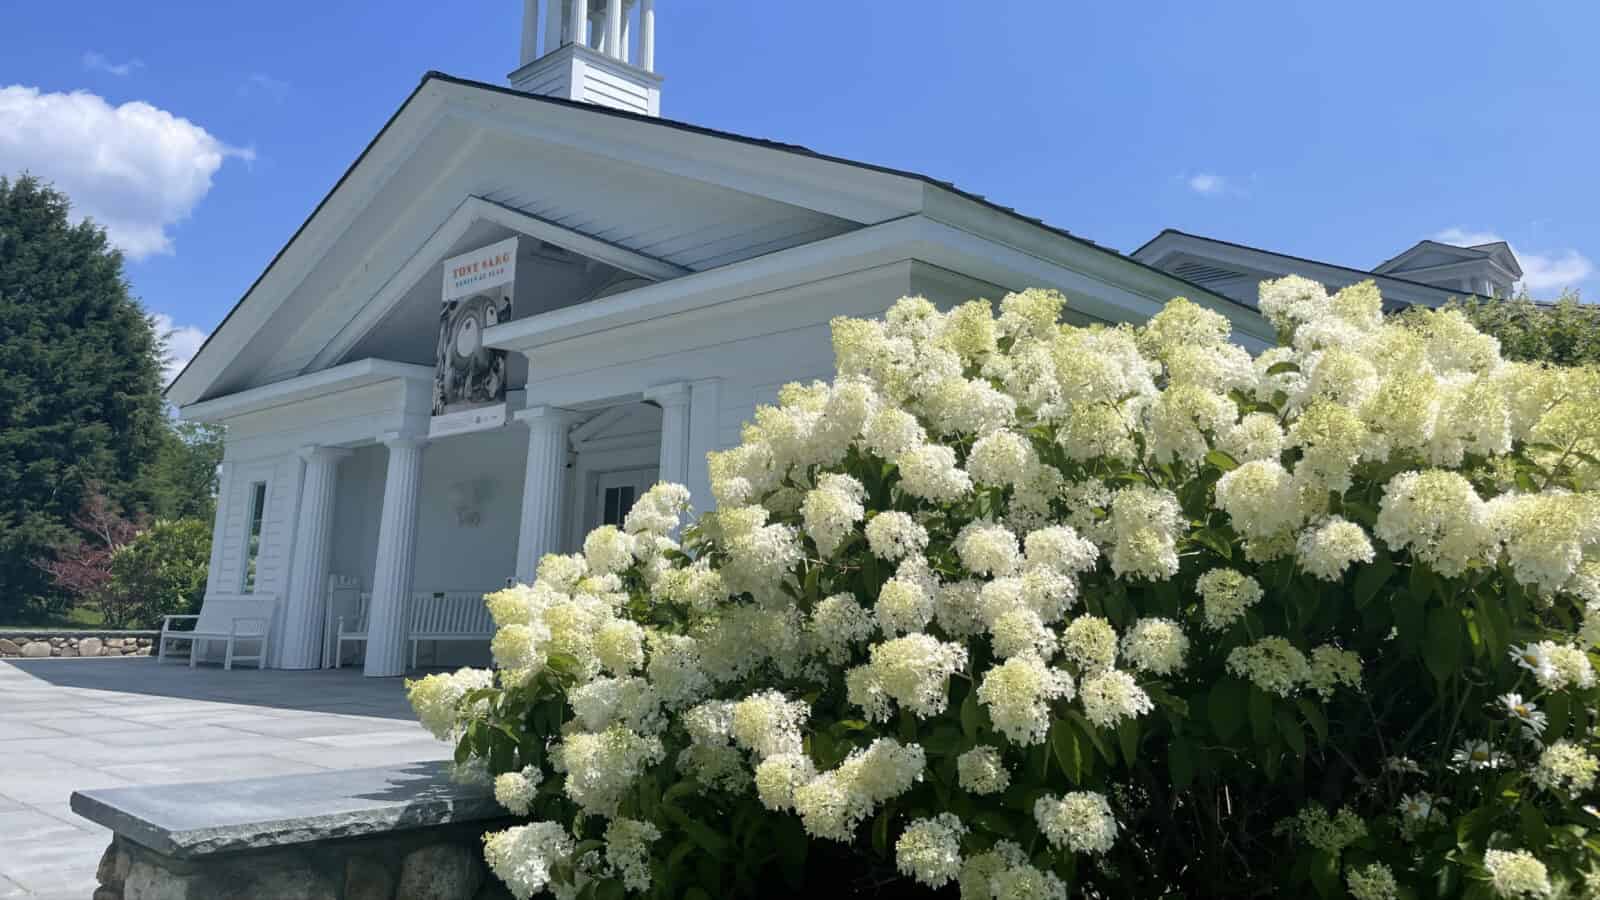 Hydrangeas bloom at the Norman Rockwell Museum on a sunny summer day.